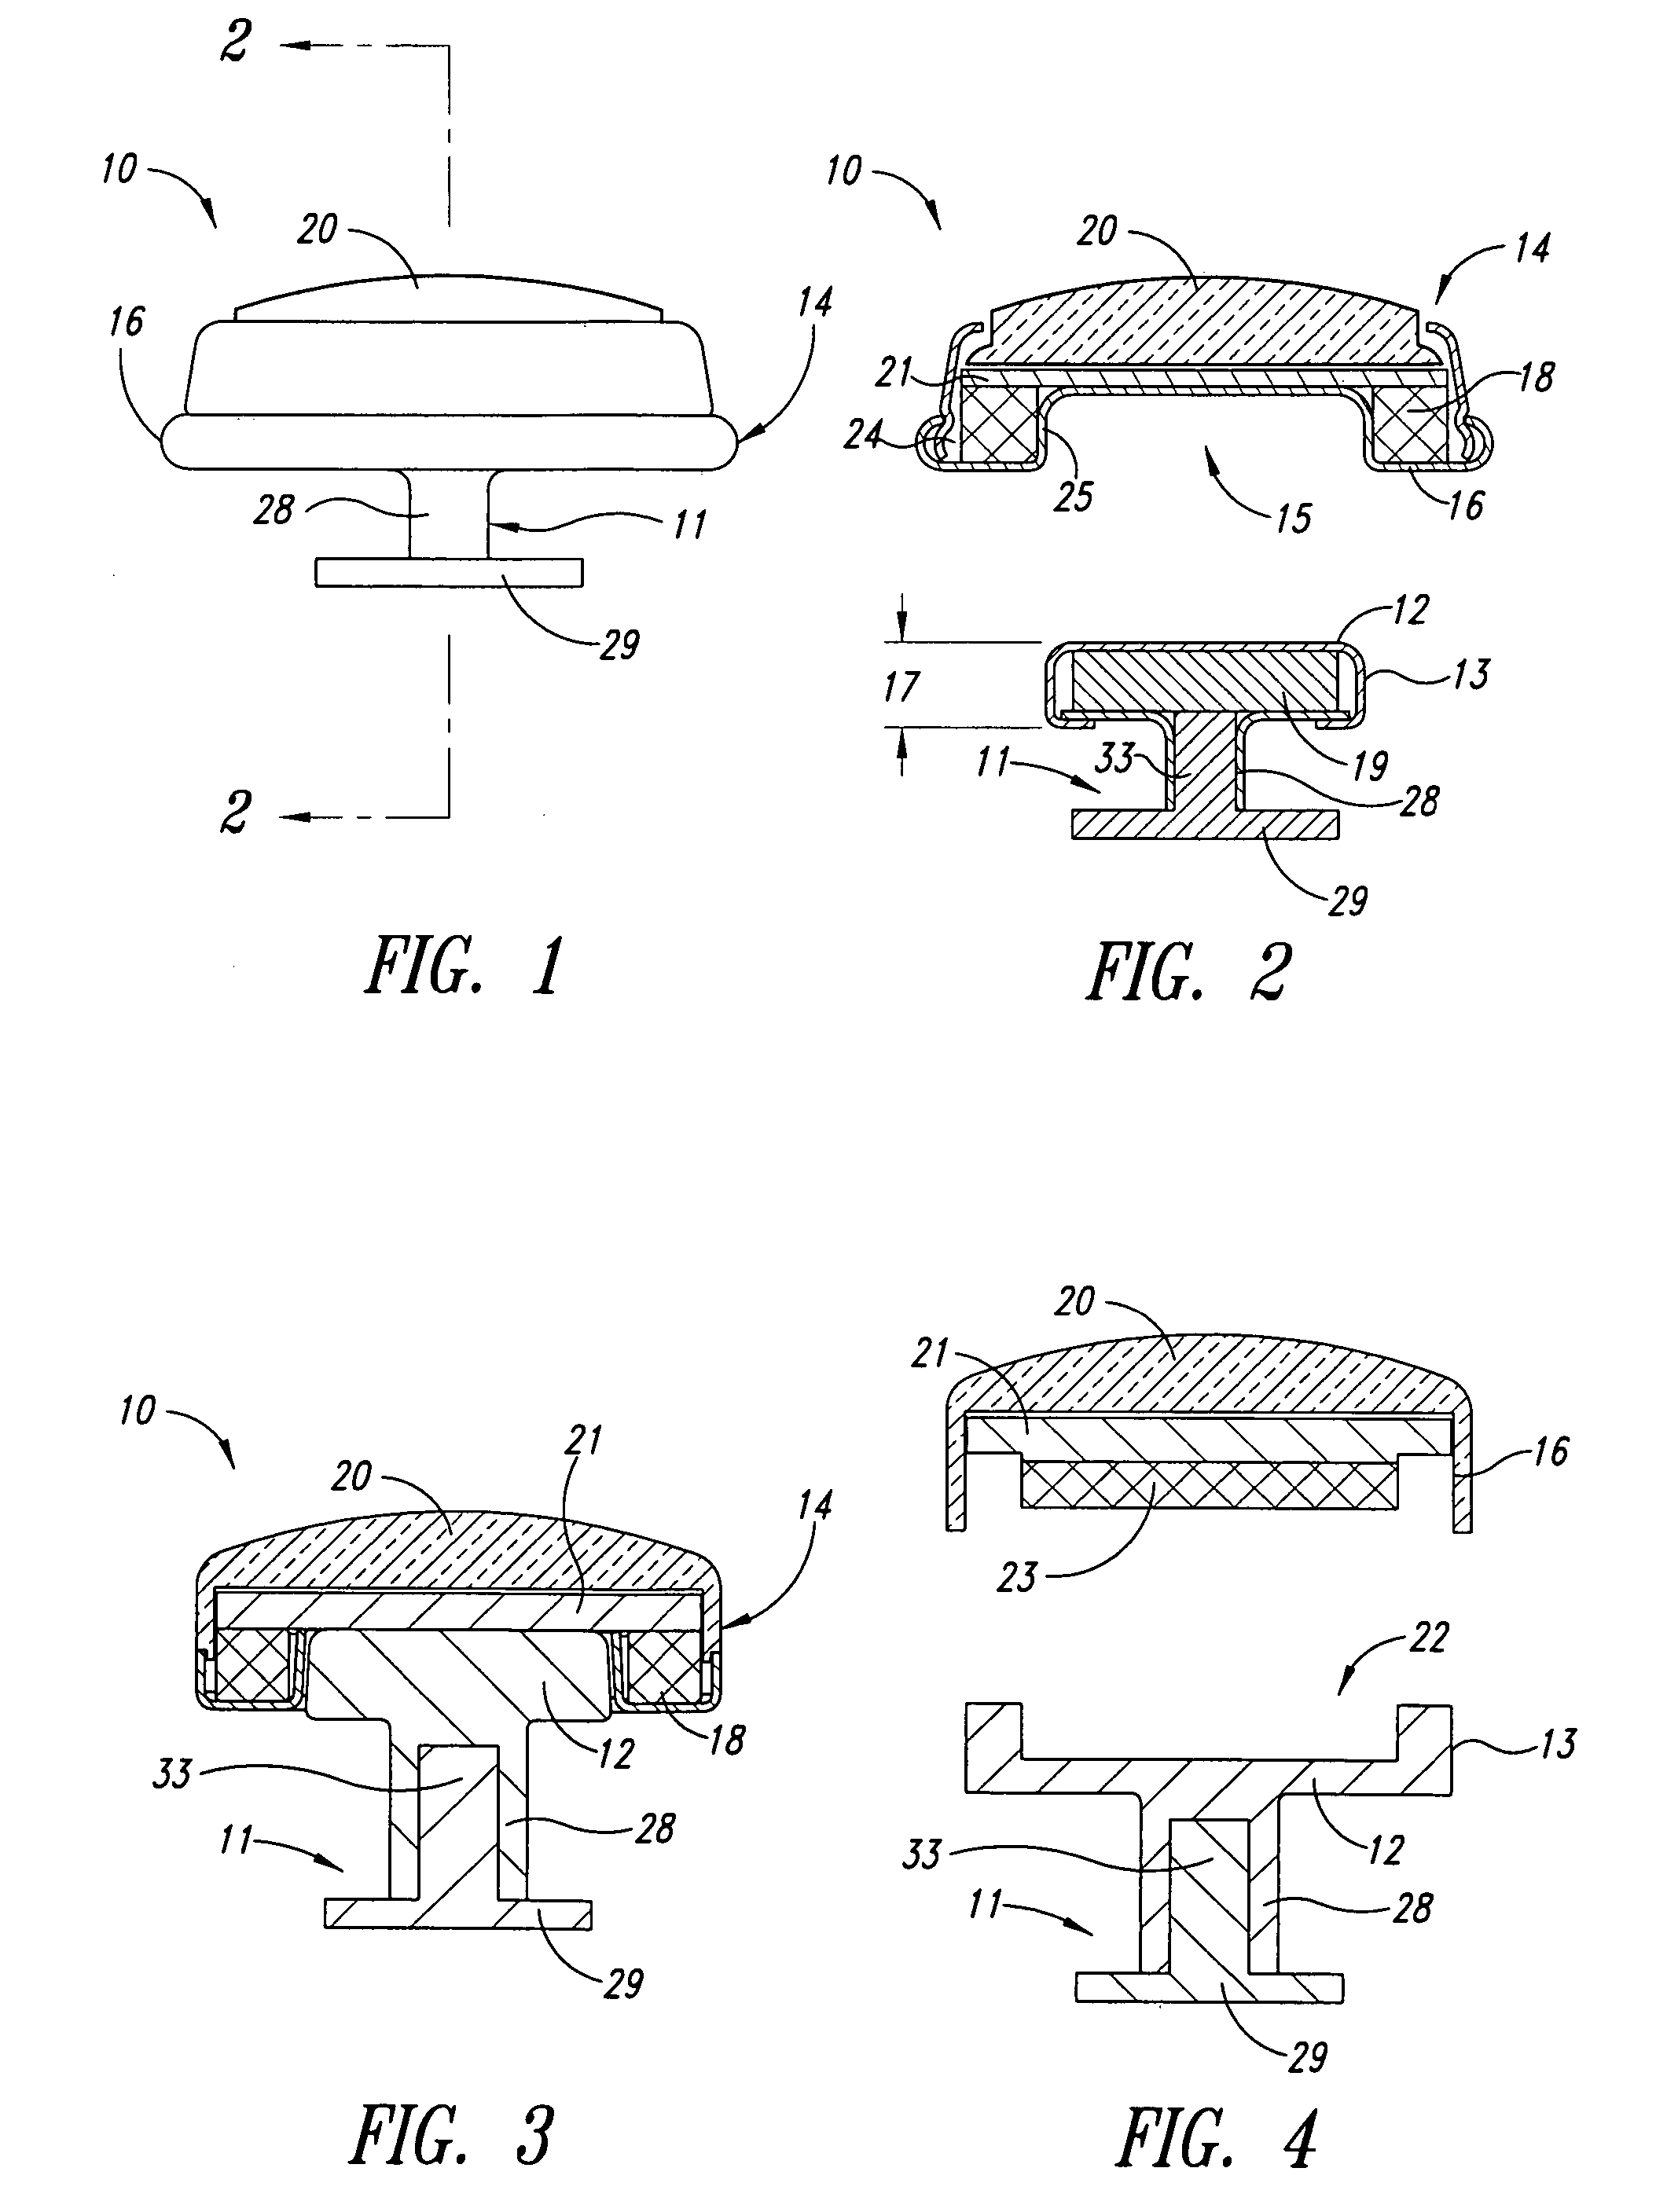 Apparatus for securing ornamentation to personal items